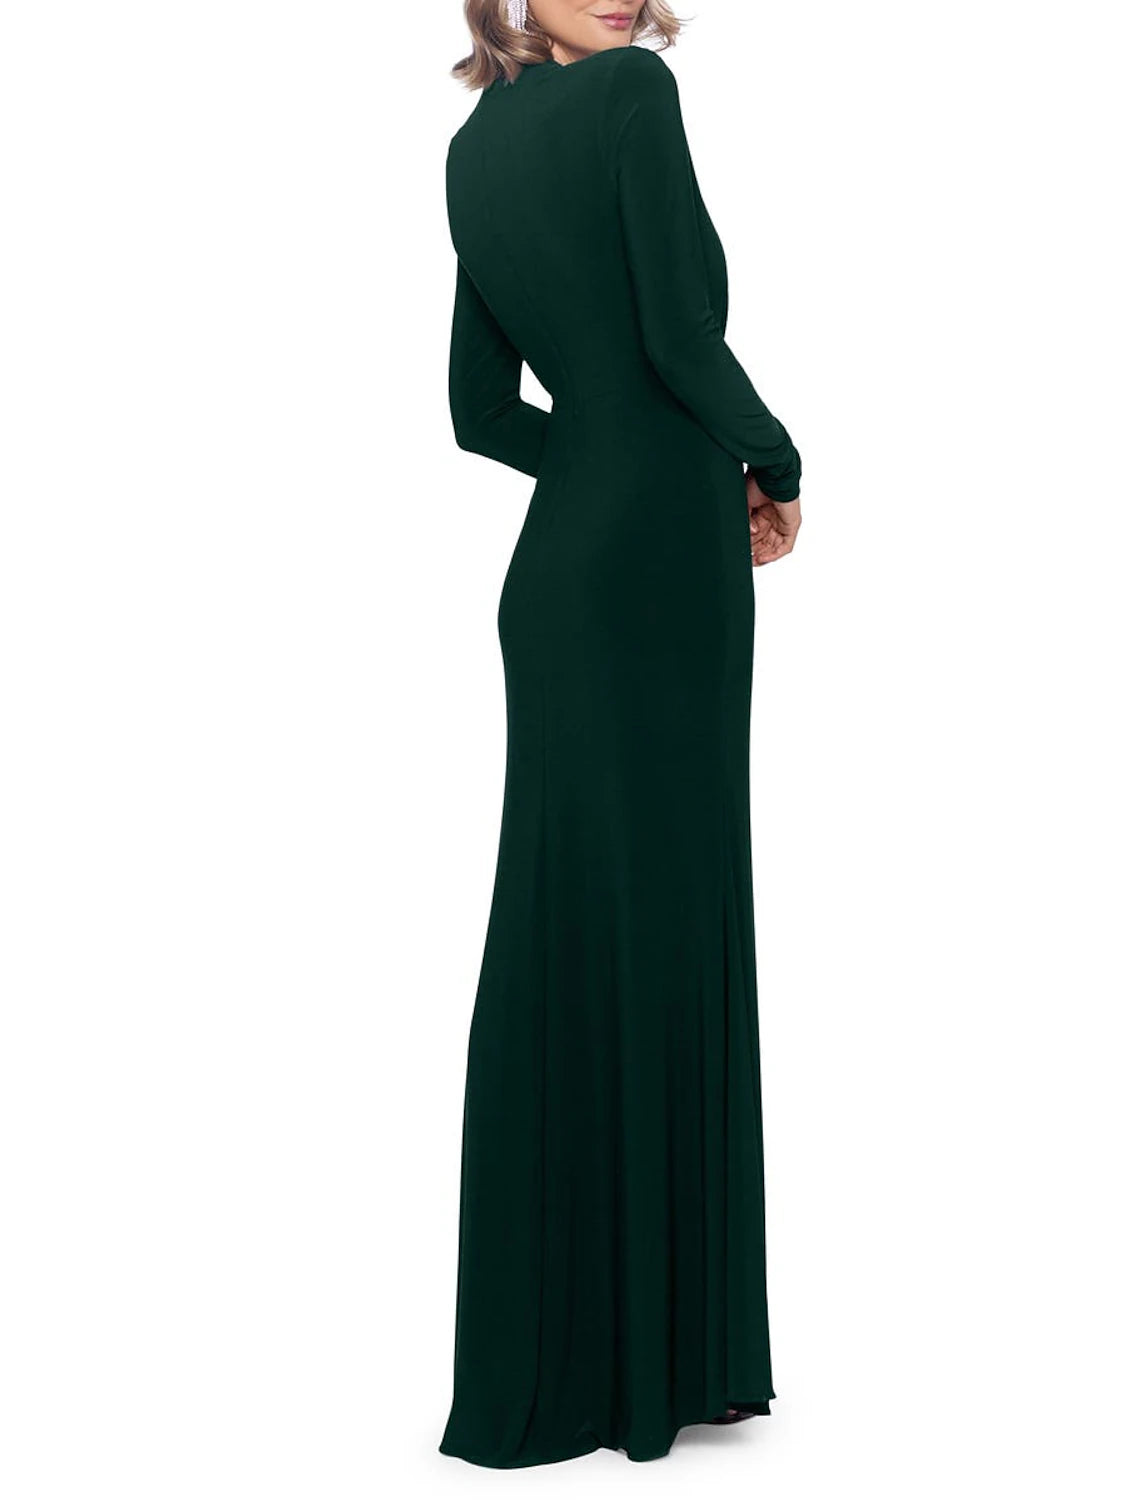 Sheath / Column Mother of the Bride Dress Formal Wedding Guest Party Elegant High Neck Floor Length Spandex Long Sleeve with Pleats Split Front